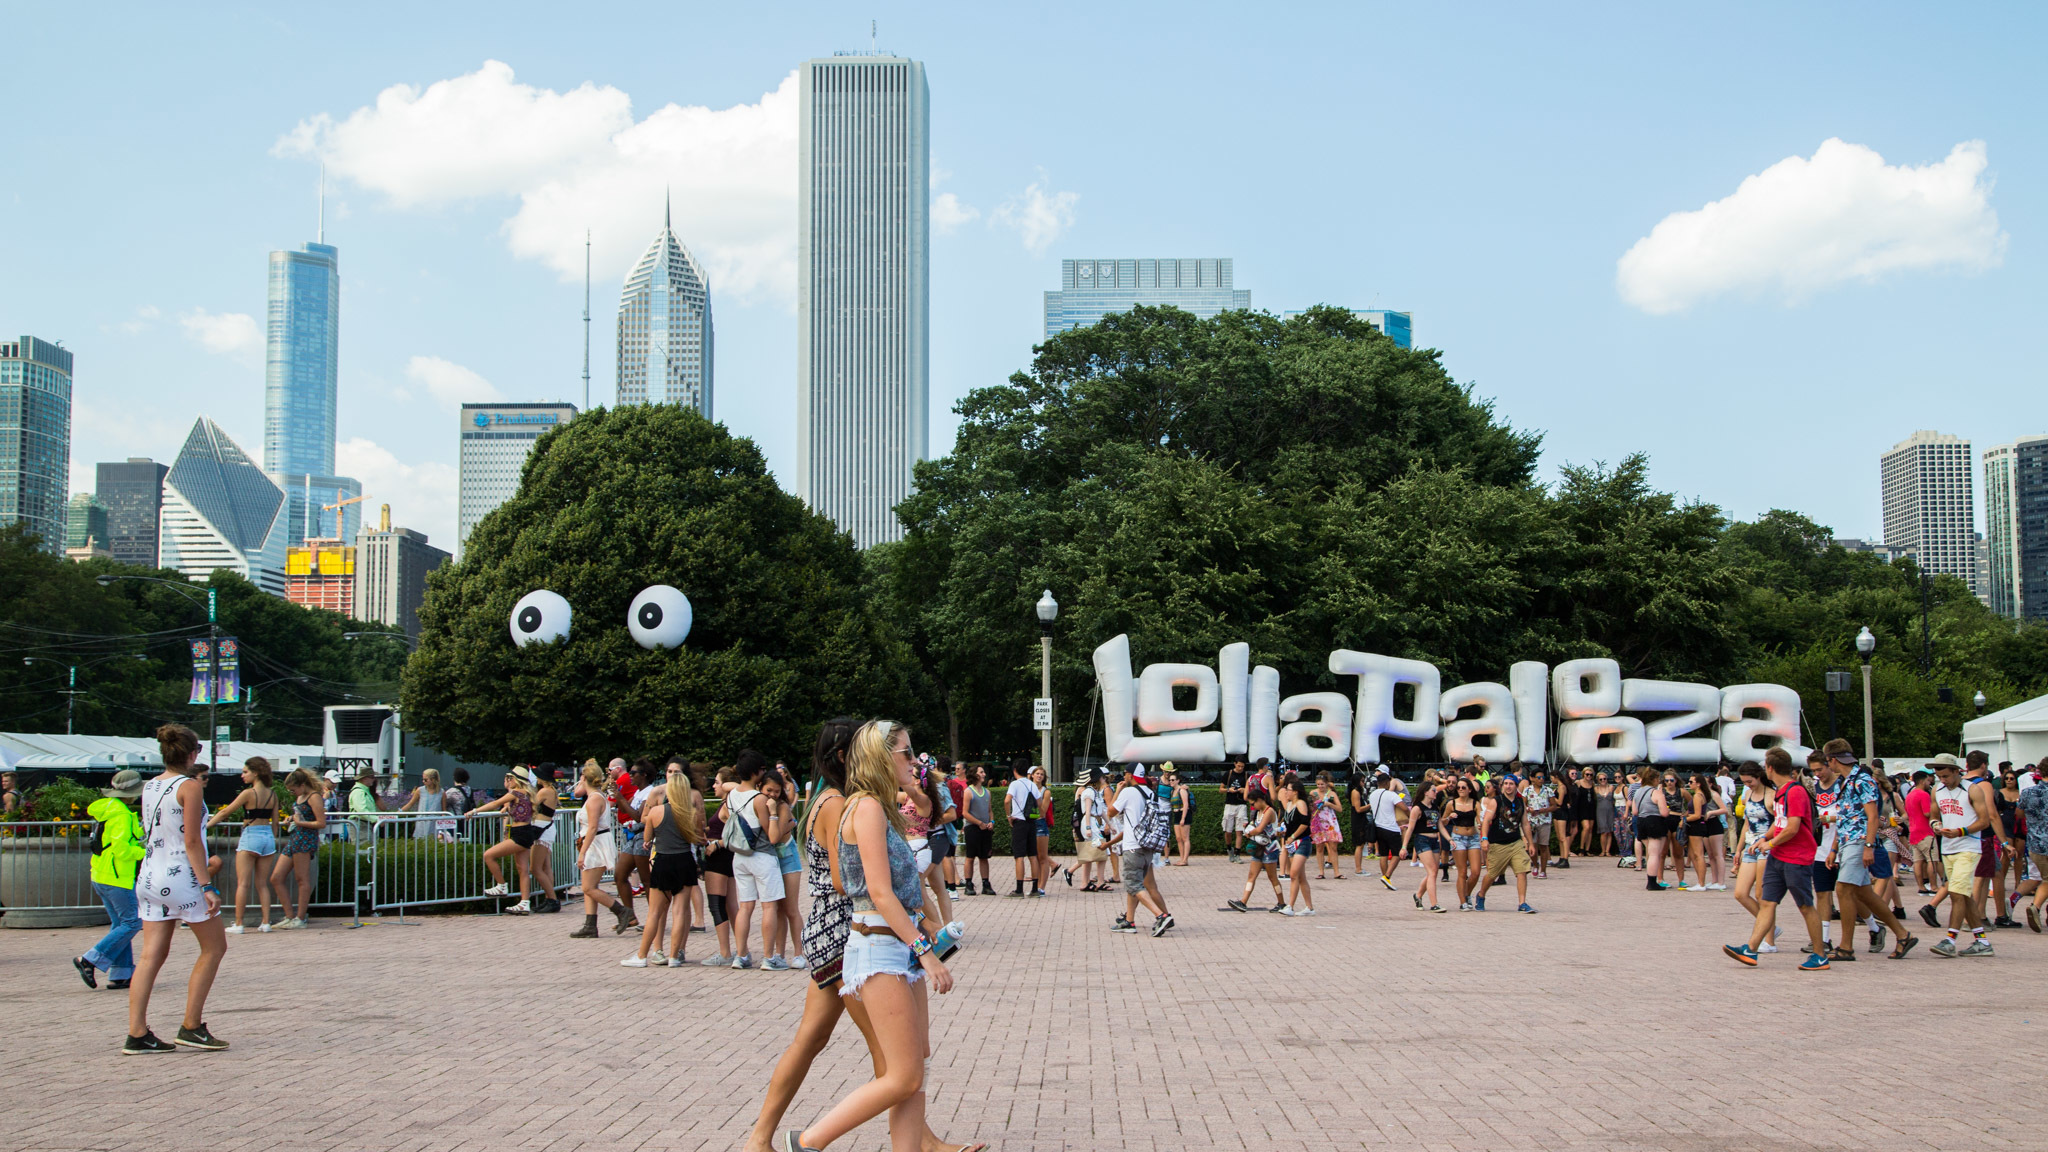 Lollapalooza 2016 tickets will go on sale in March